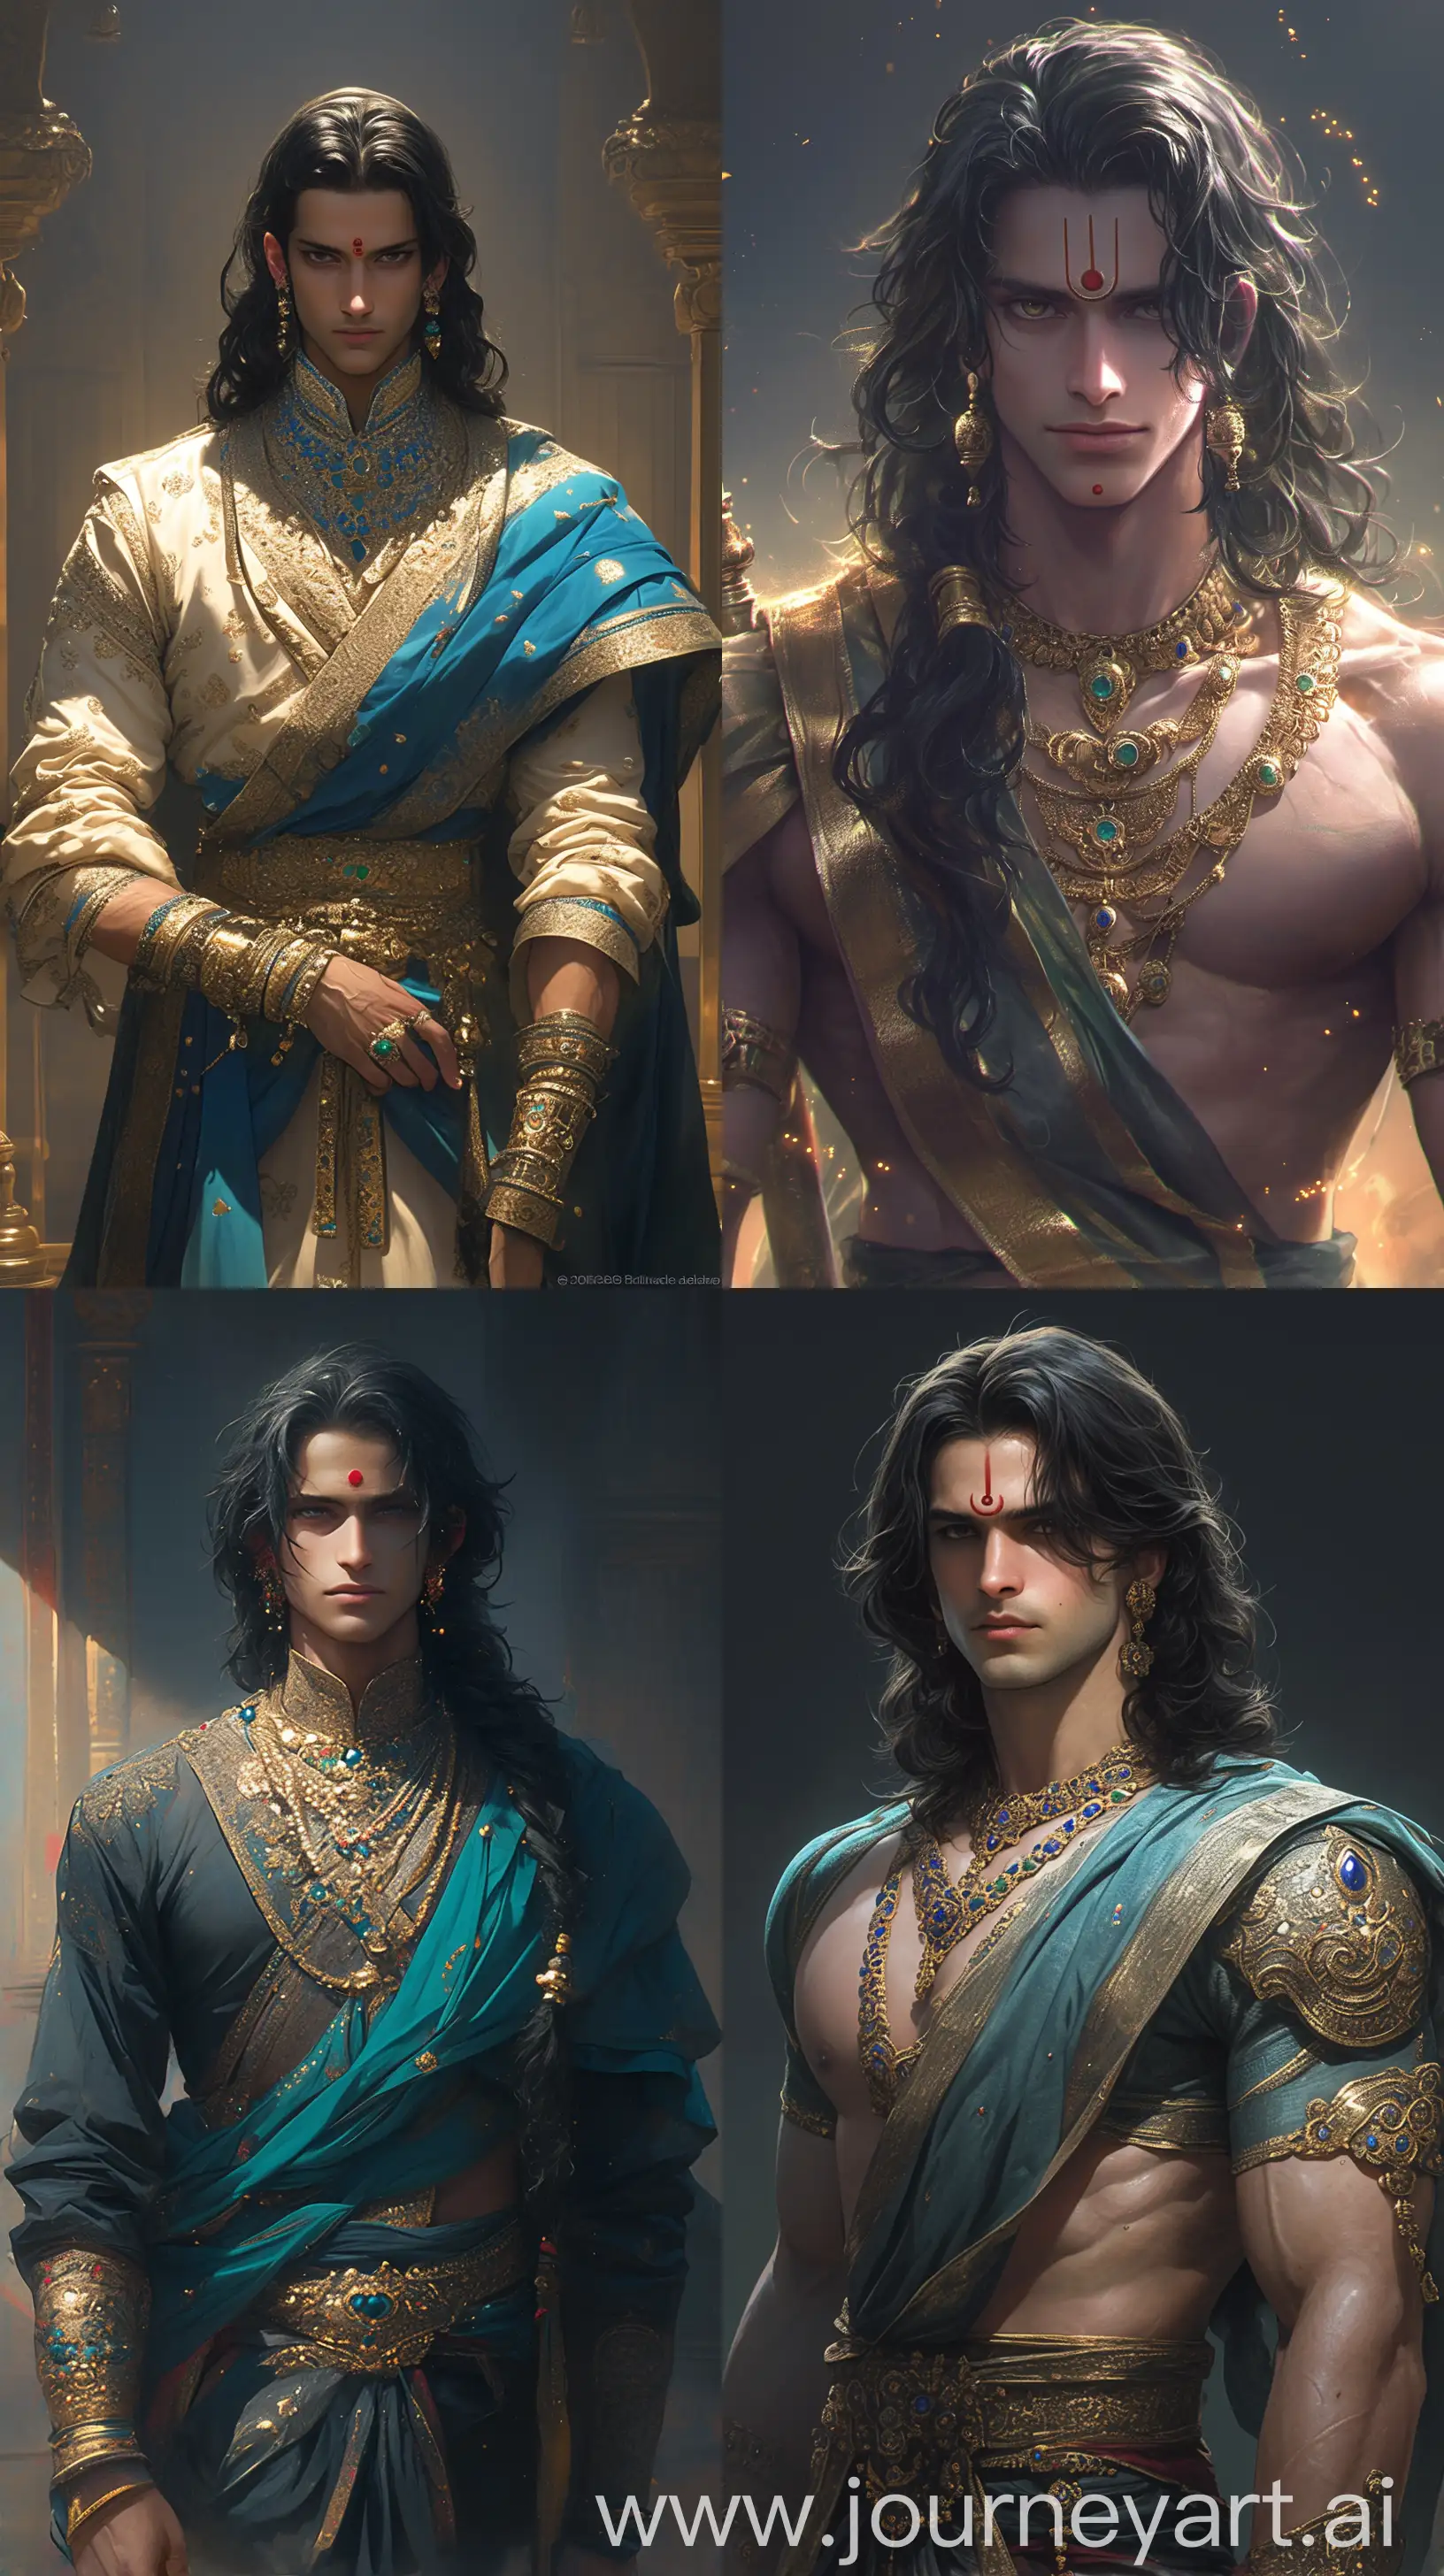 Young Indian prince from the times of the Mahabharata, detailed royal attire with gold and gems, elegant stand, serene expression, luxurious long black hair, ancient Hindu aesthetics, ultra high resolution --ar 9:16 --s 300 --niji 6